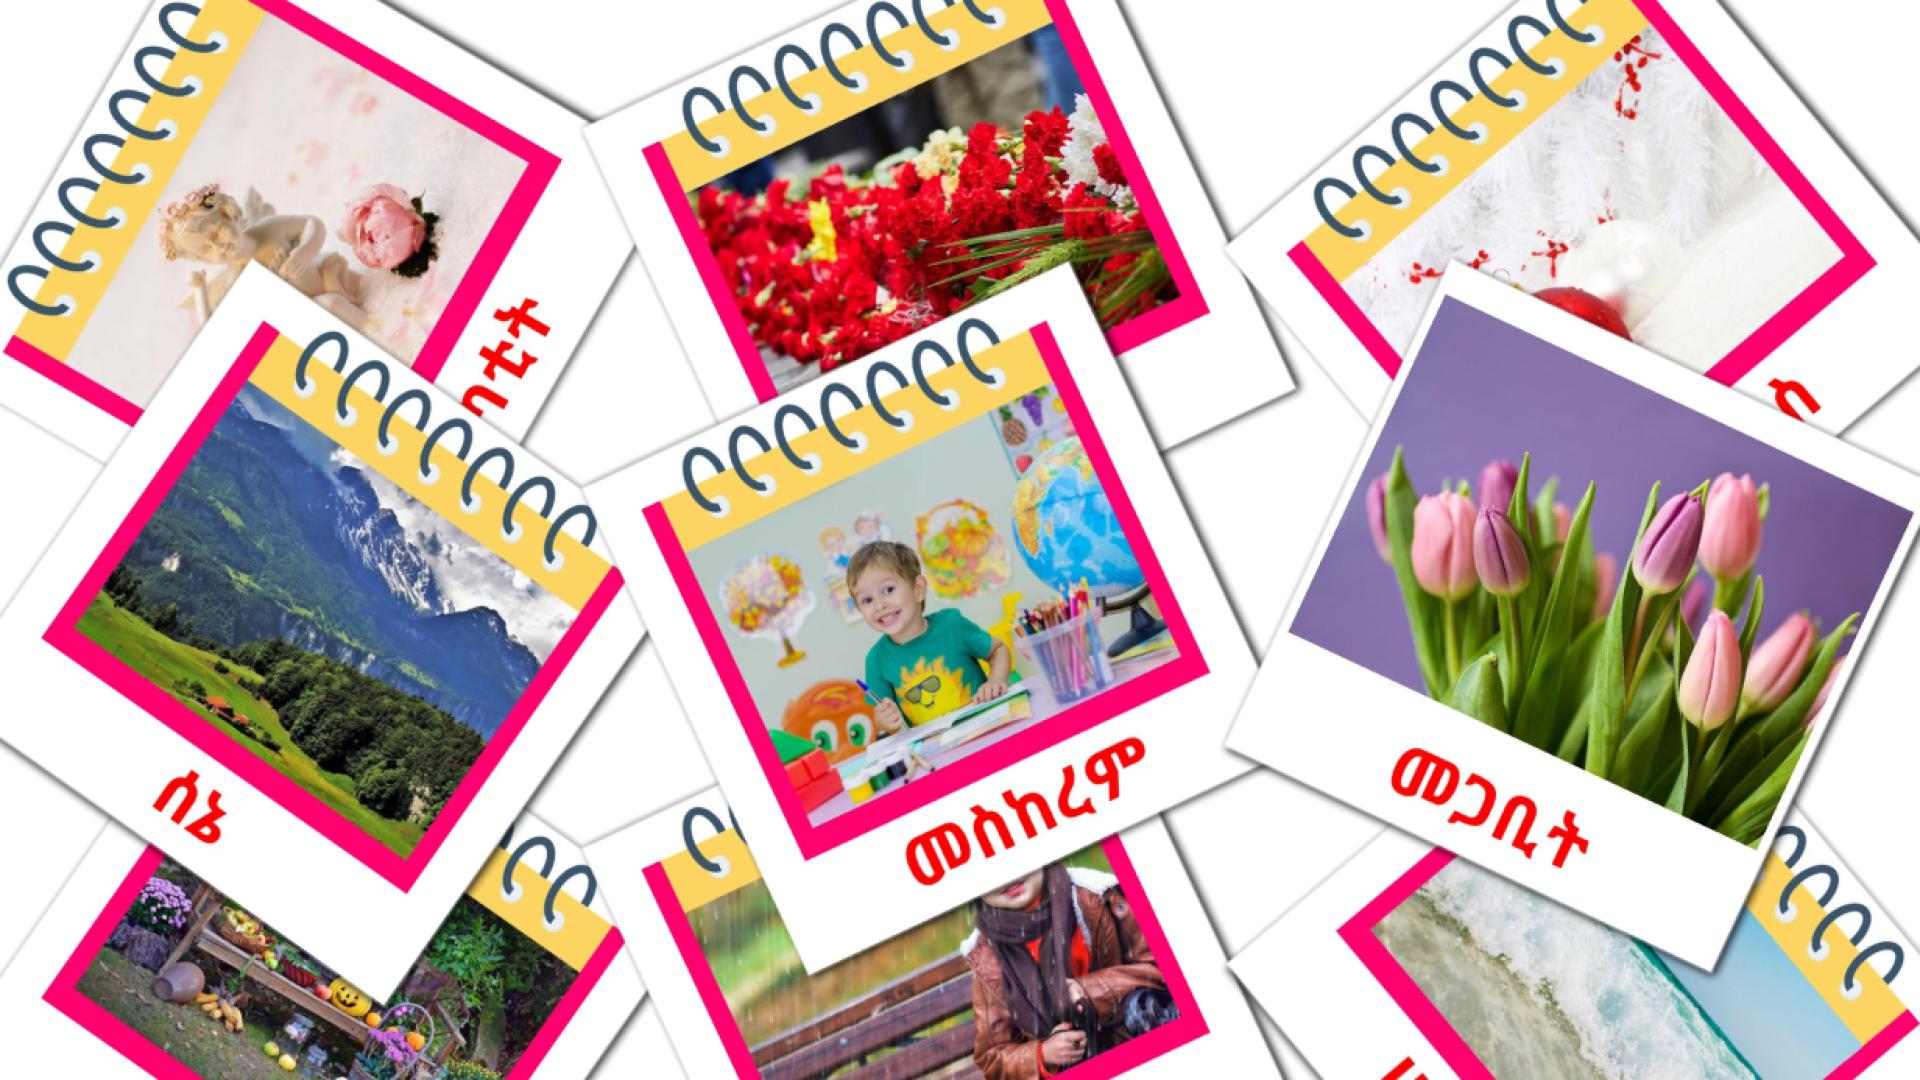 Months of the Year - amharic vocabulary cards